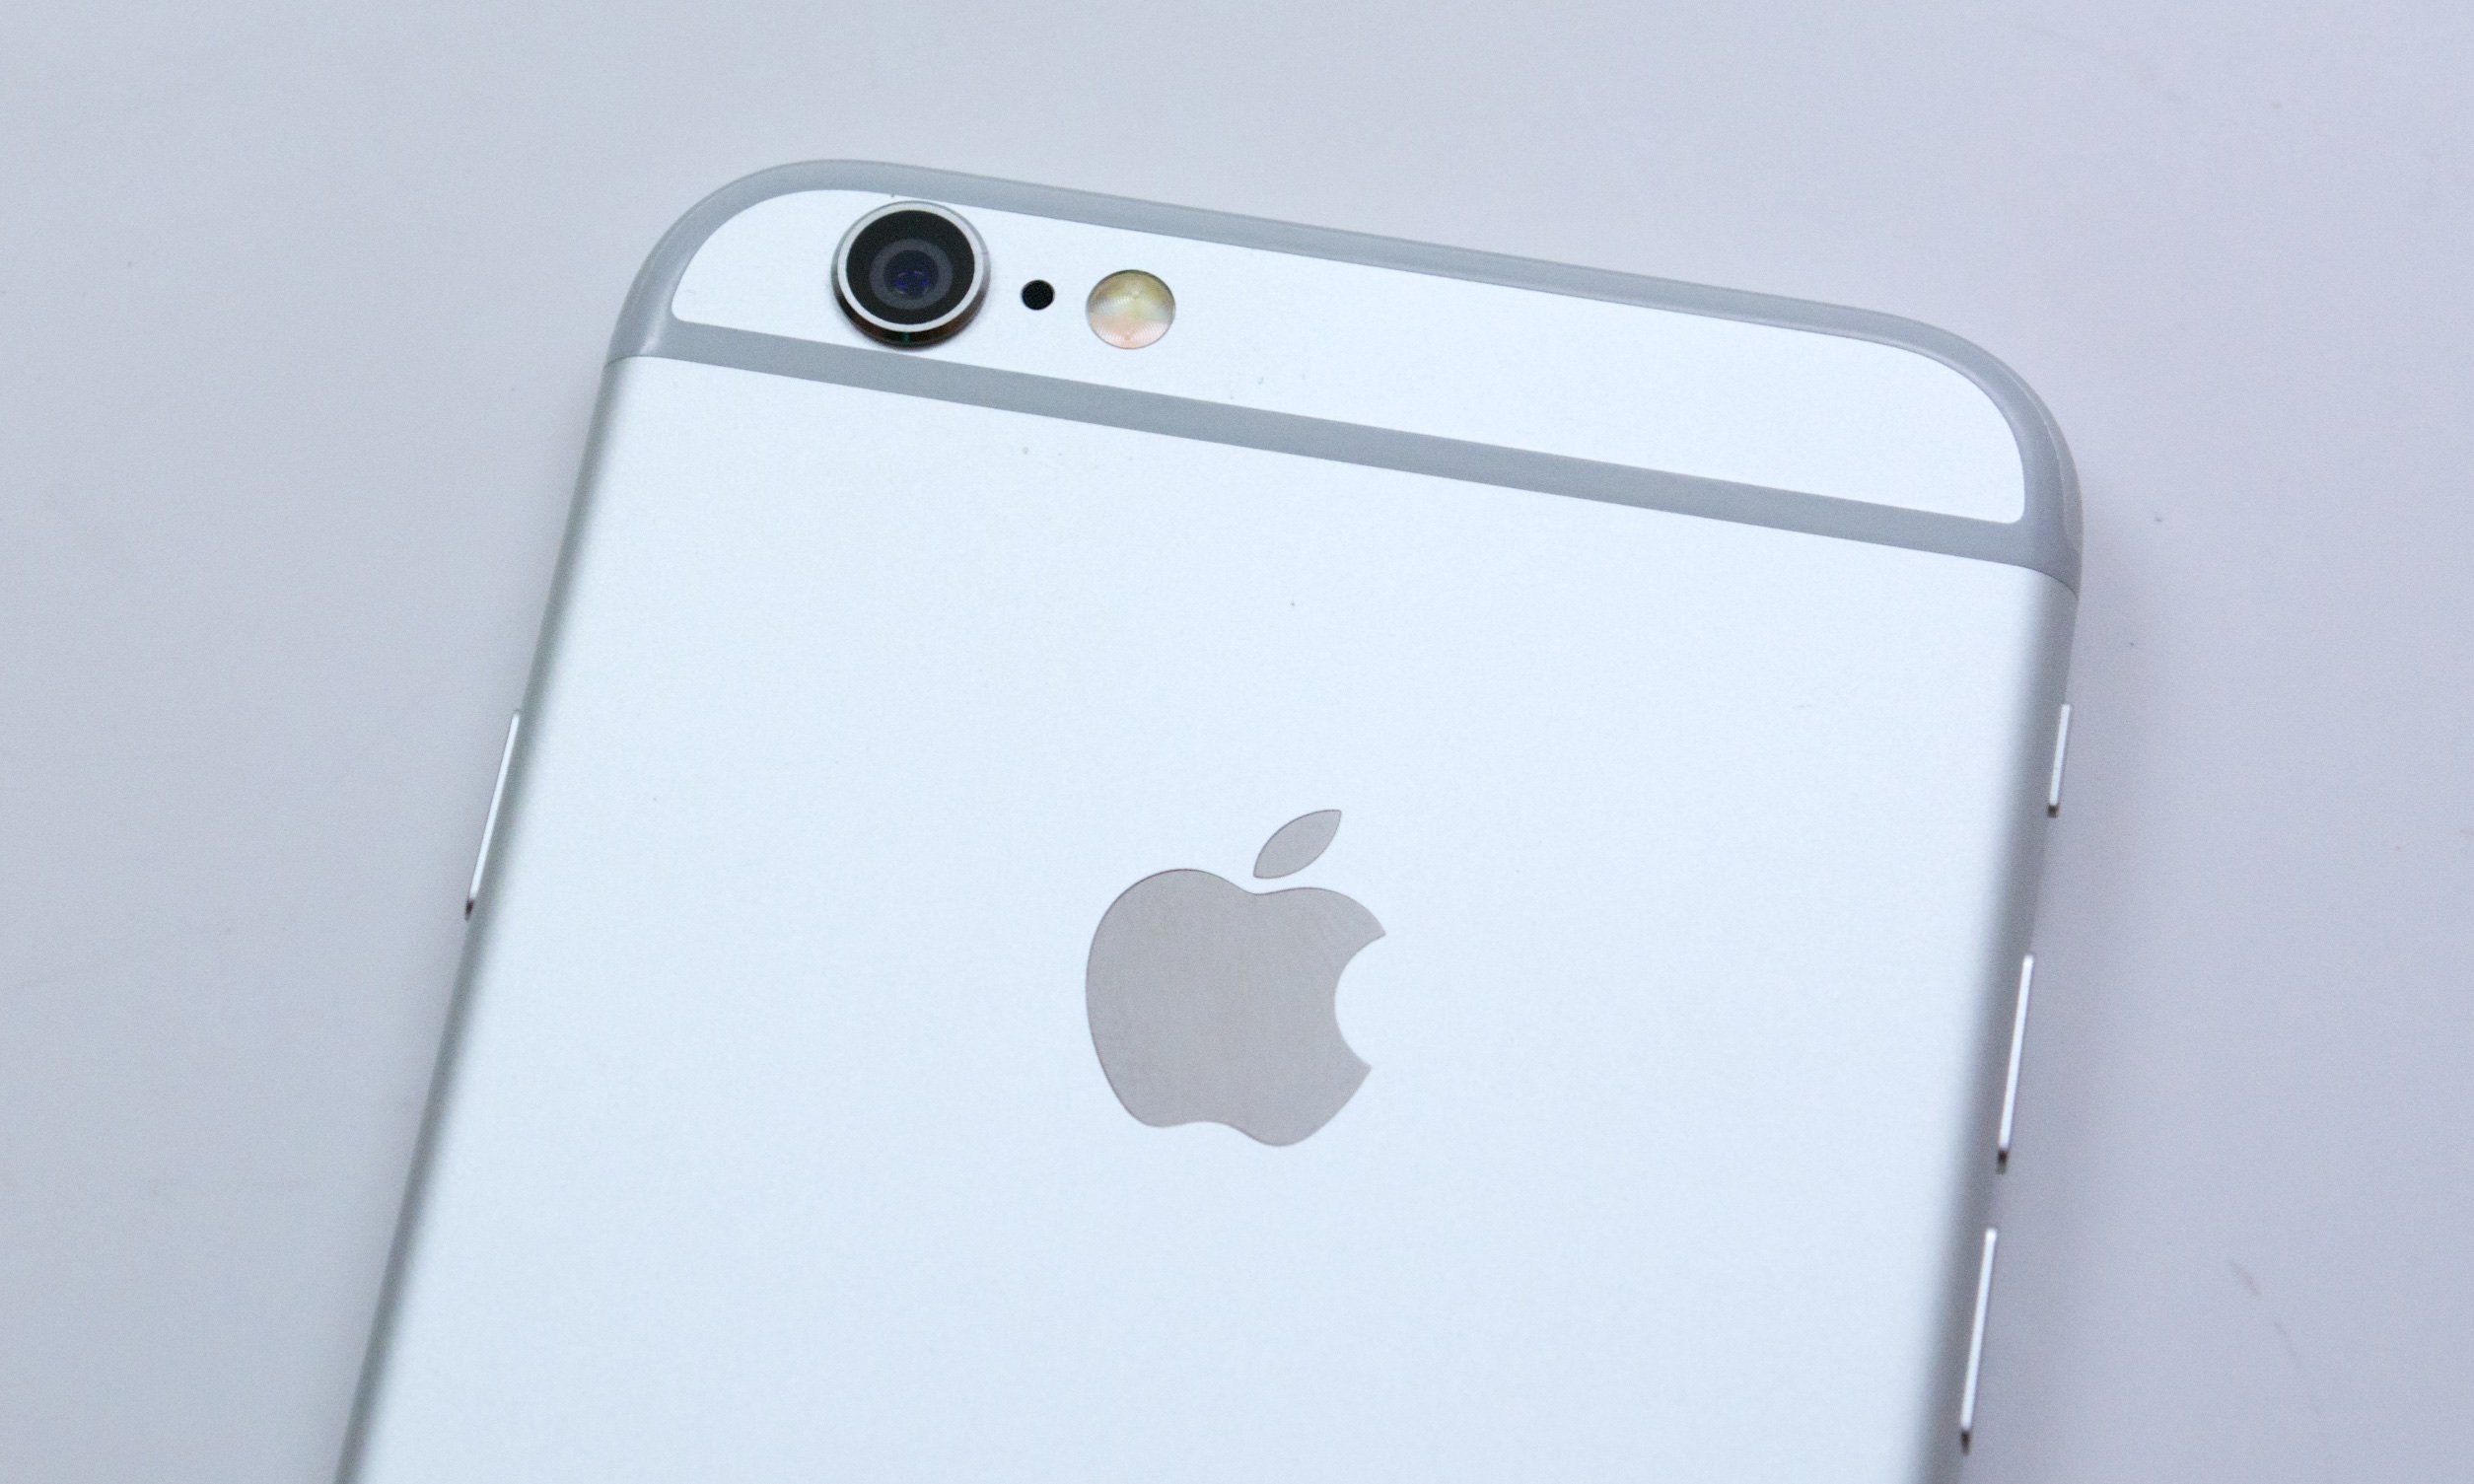 Expect to see big iPhone 6s camera upgrades.